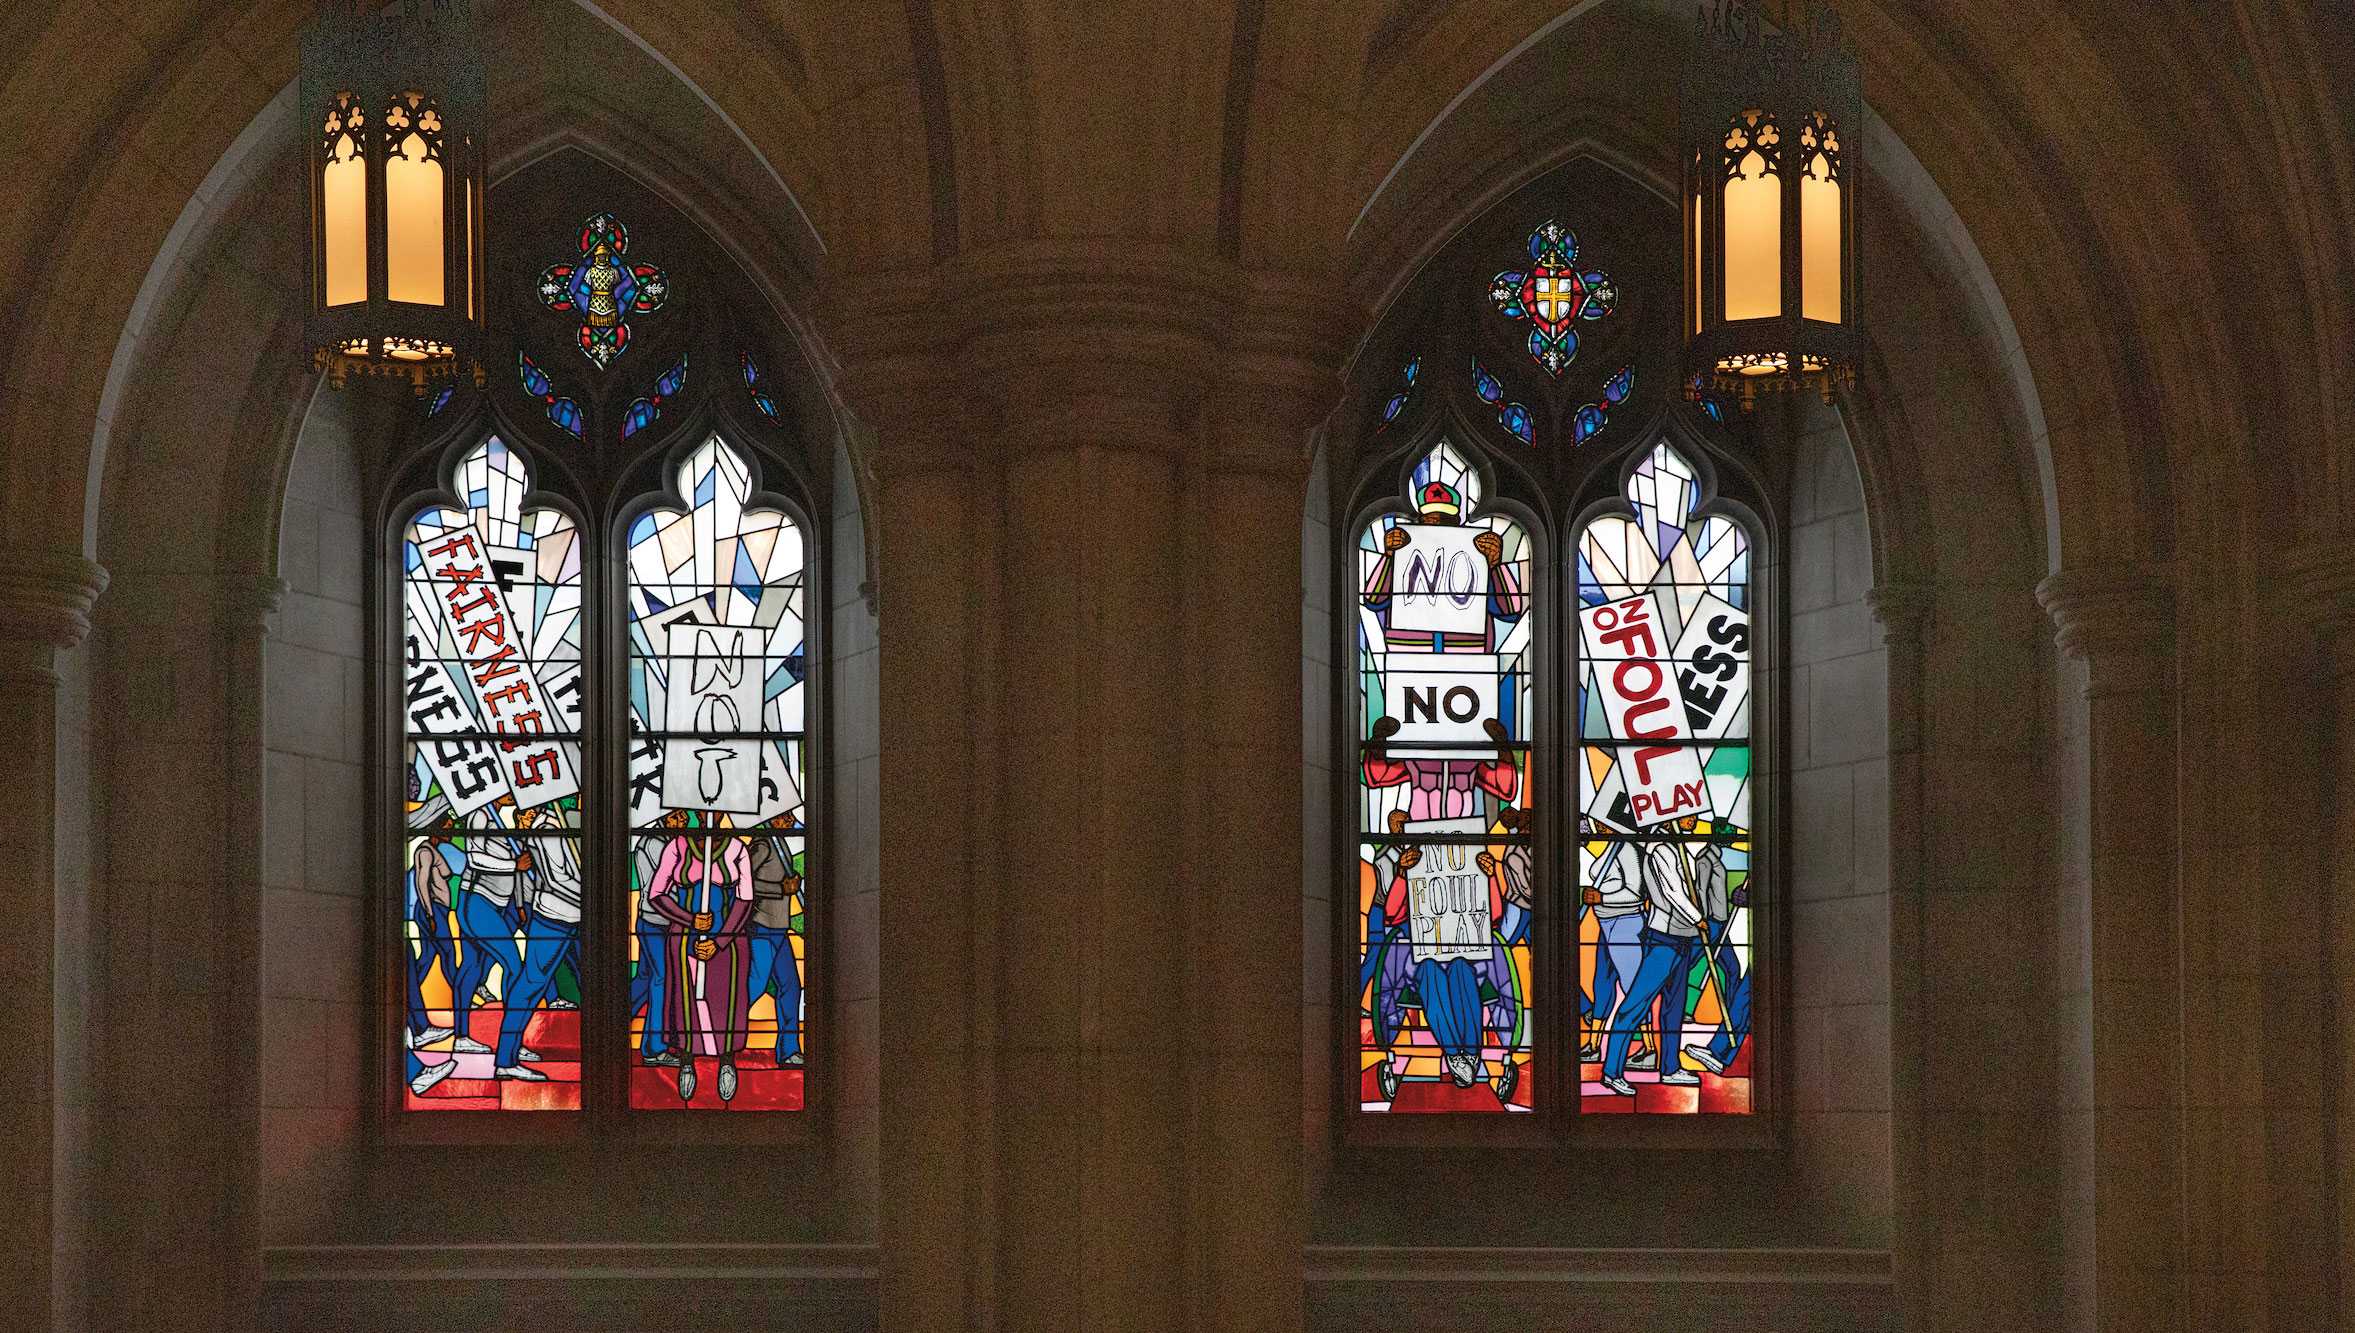 Two stain glass window depicting people protesting hate and advocating for fairness.